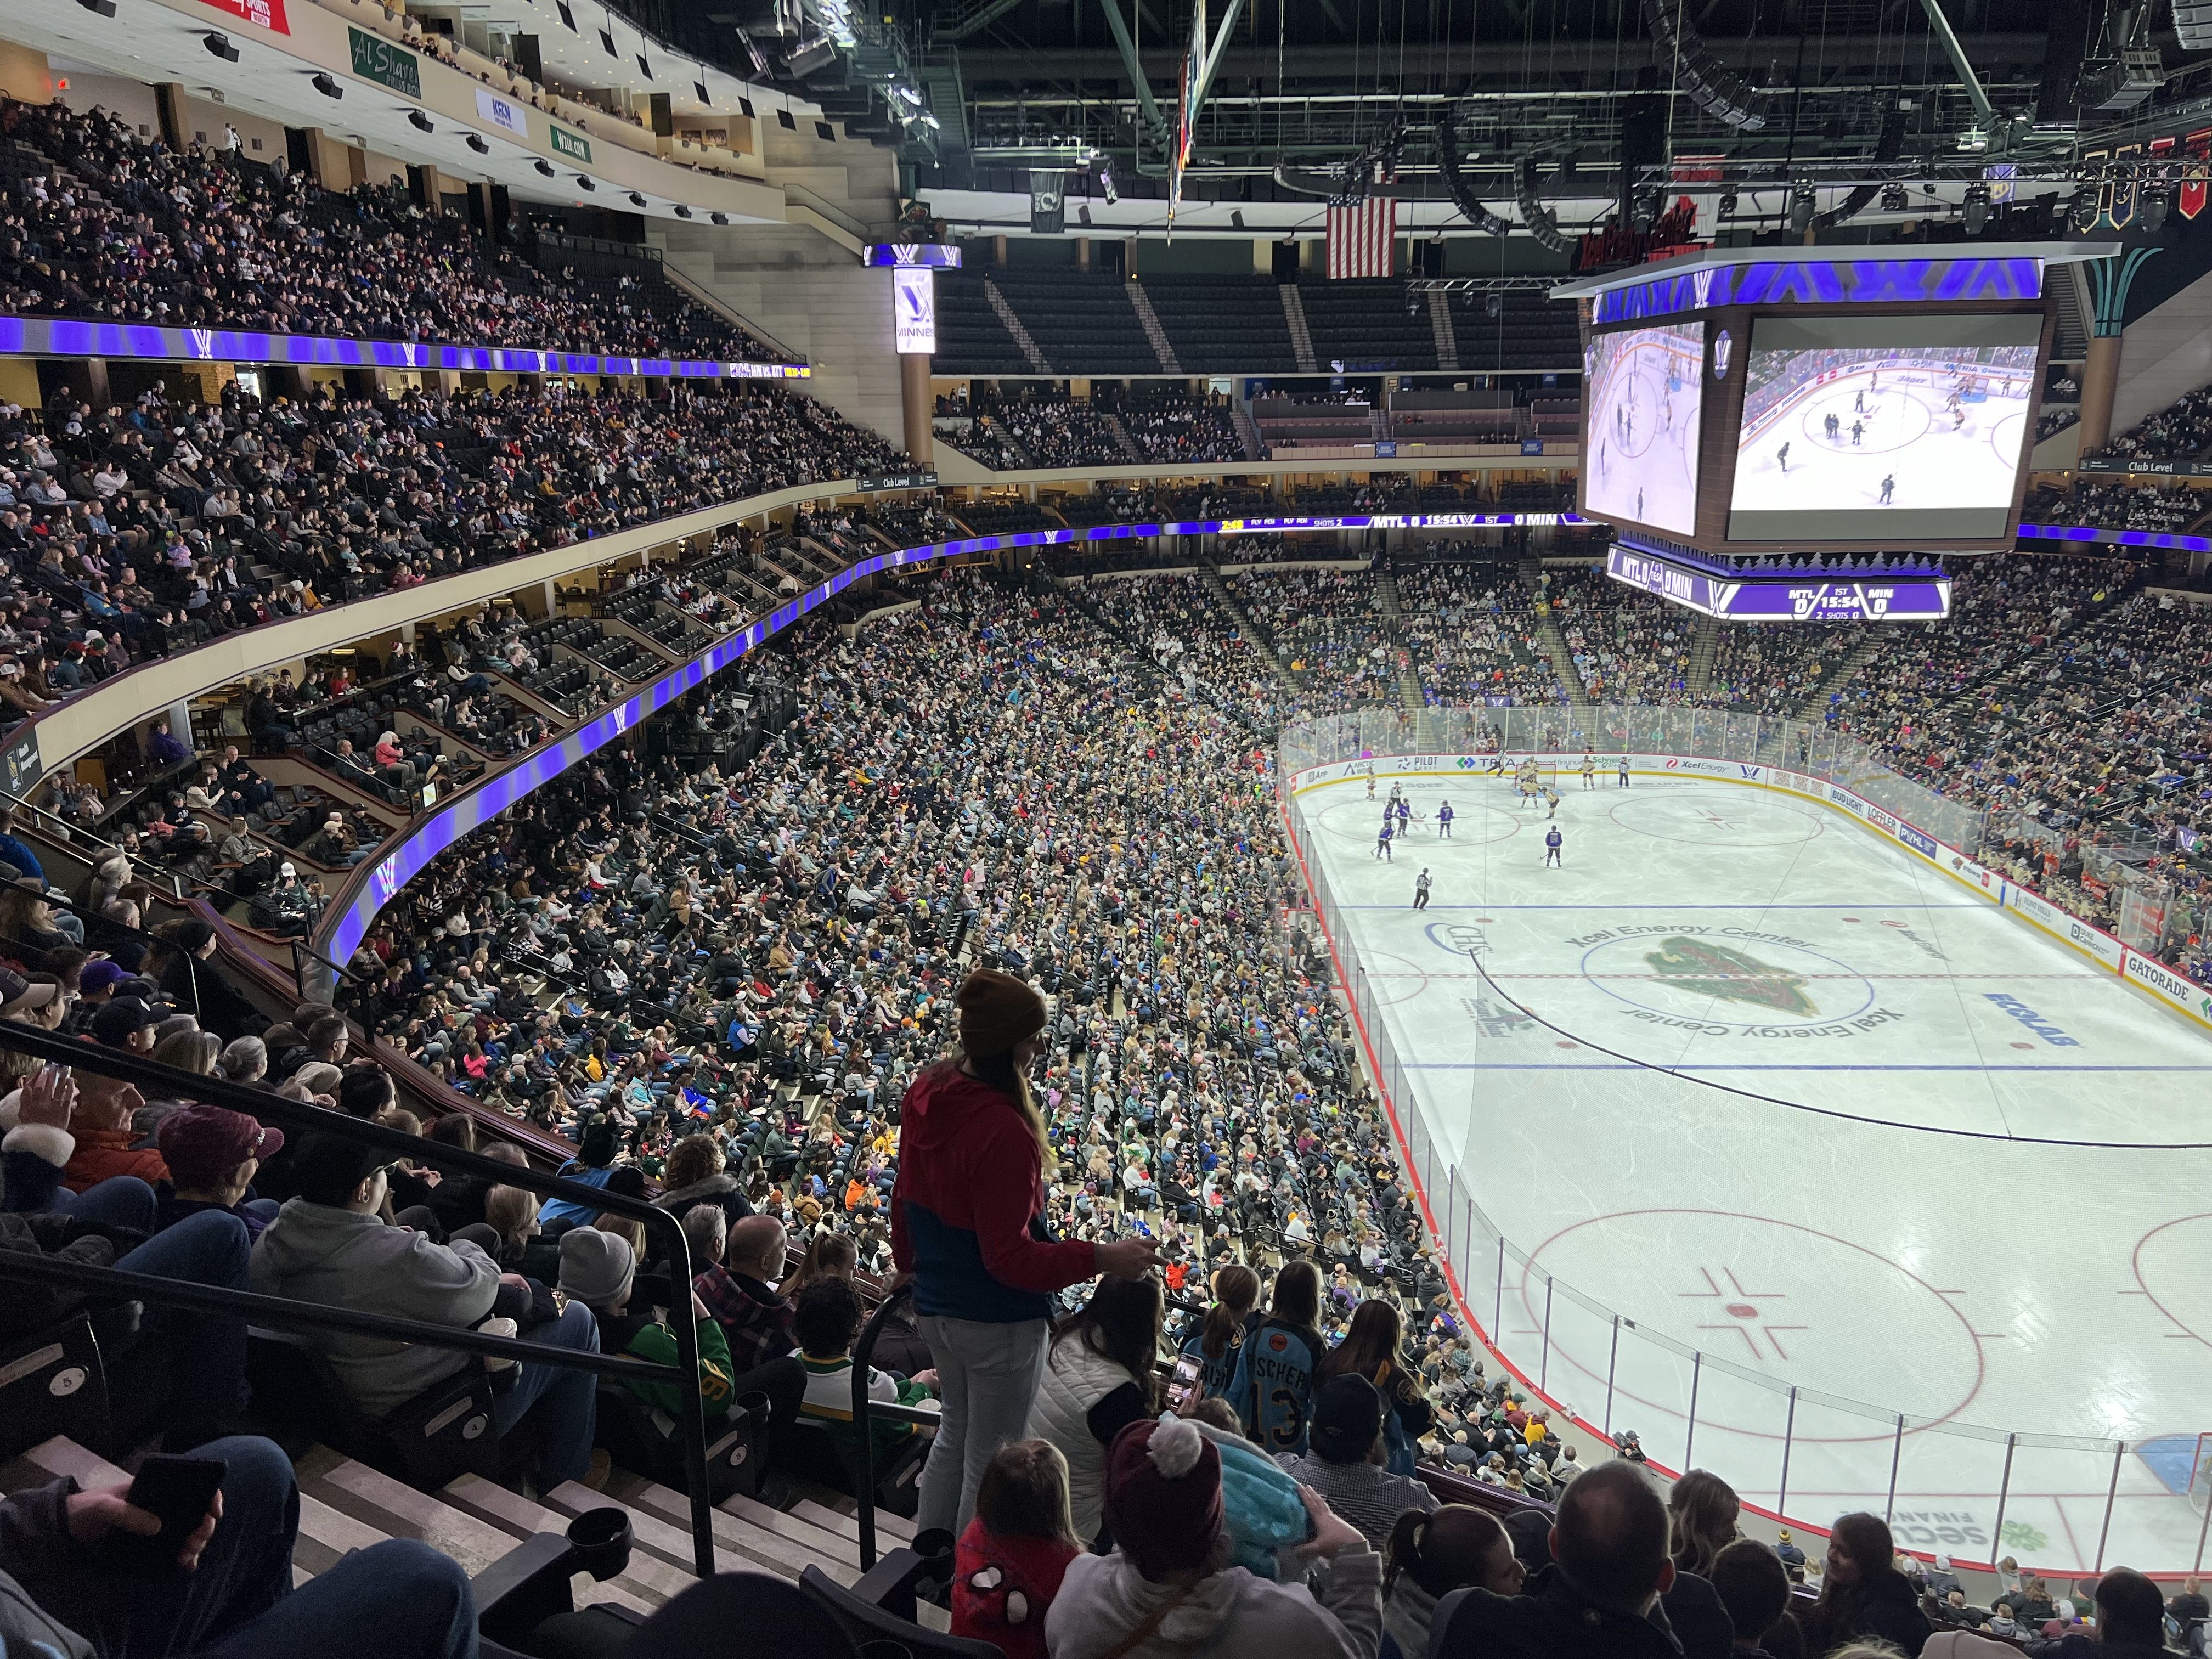 A fan searches for her seat in a large professional hockey arena.